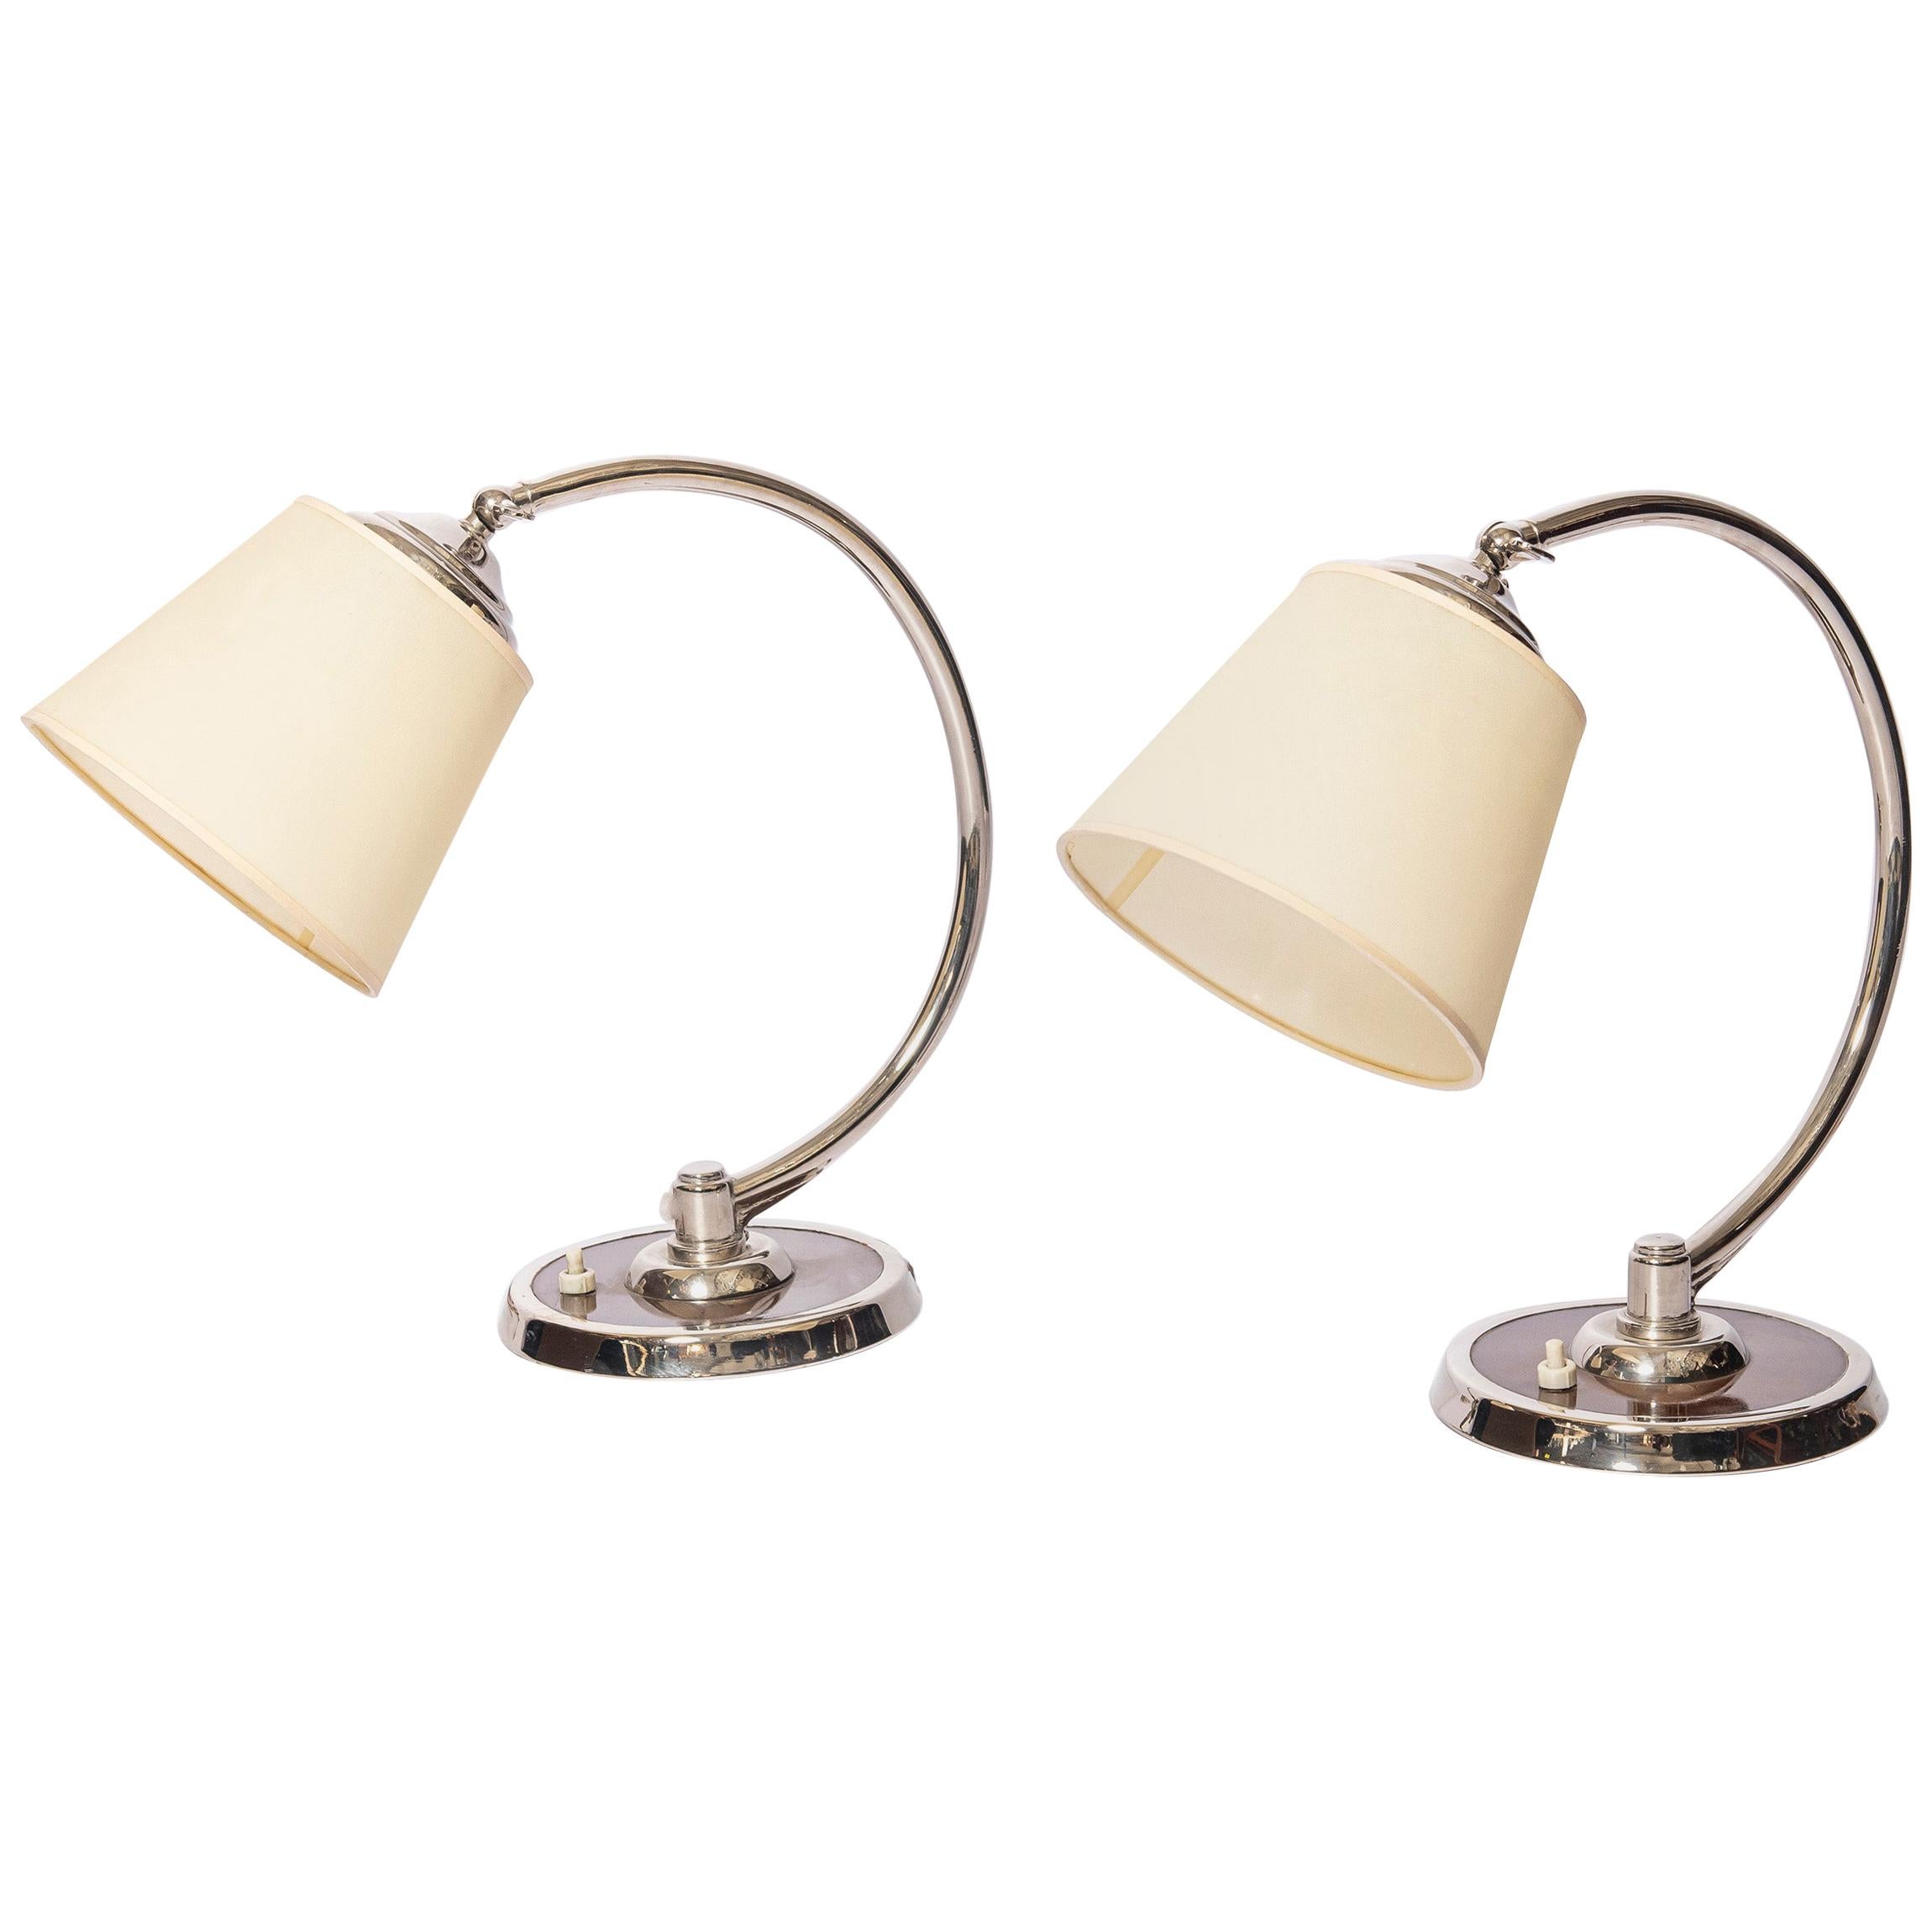 Pair of Chrome Metal and Wood Table Lamps by Casa Comte Buenos Aires, circa 1940